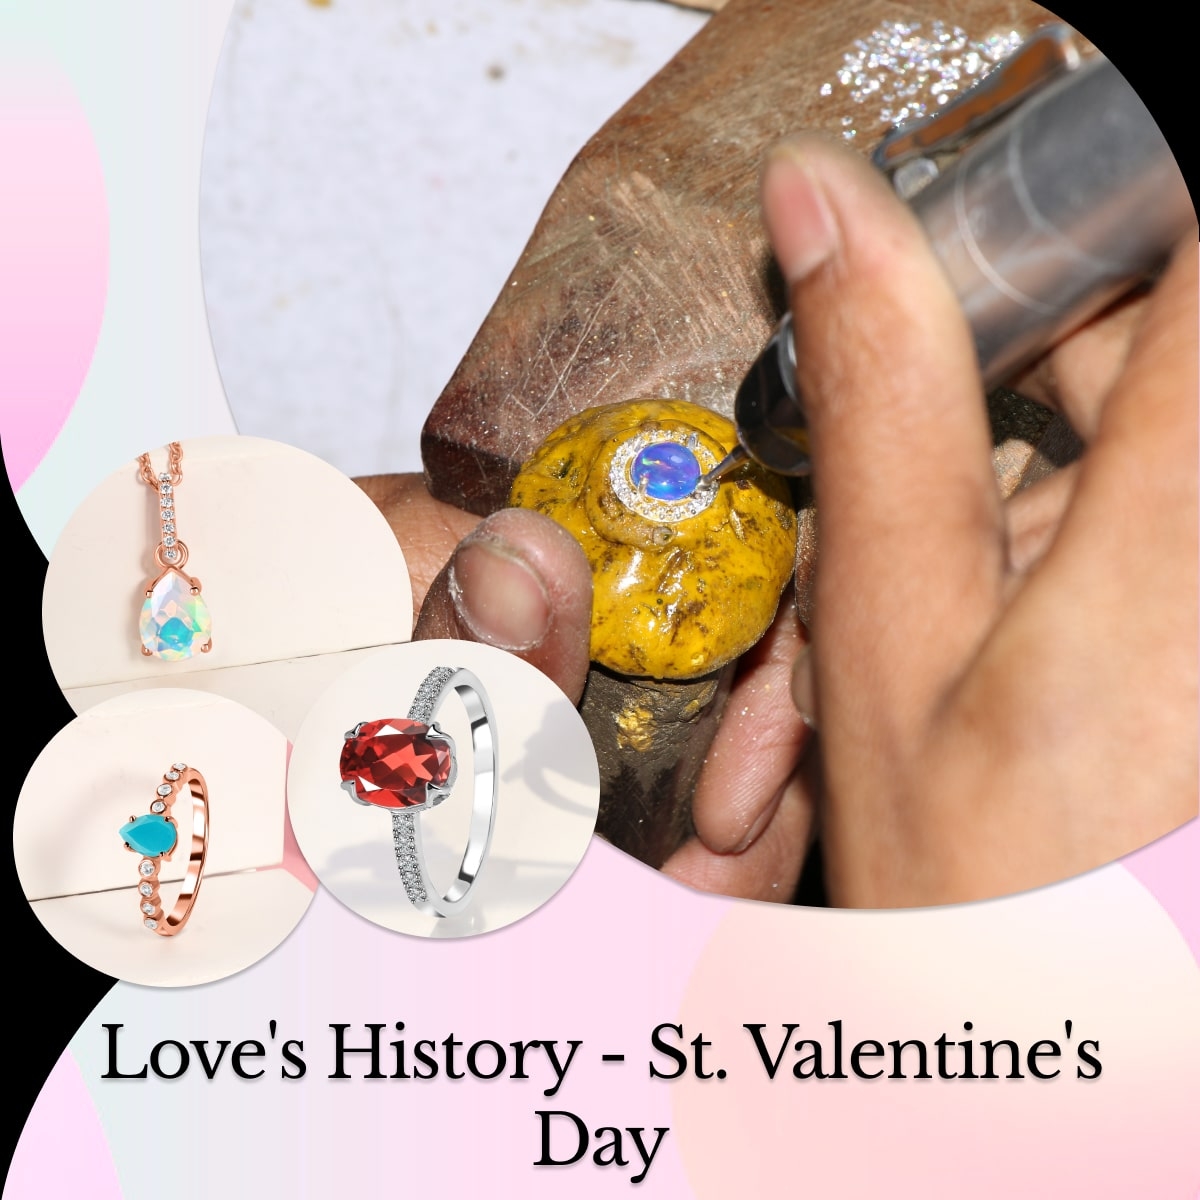 History Of Valentine’s Day and Its Association with St. Valentine